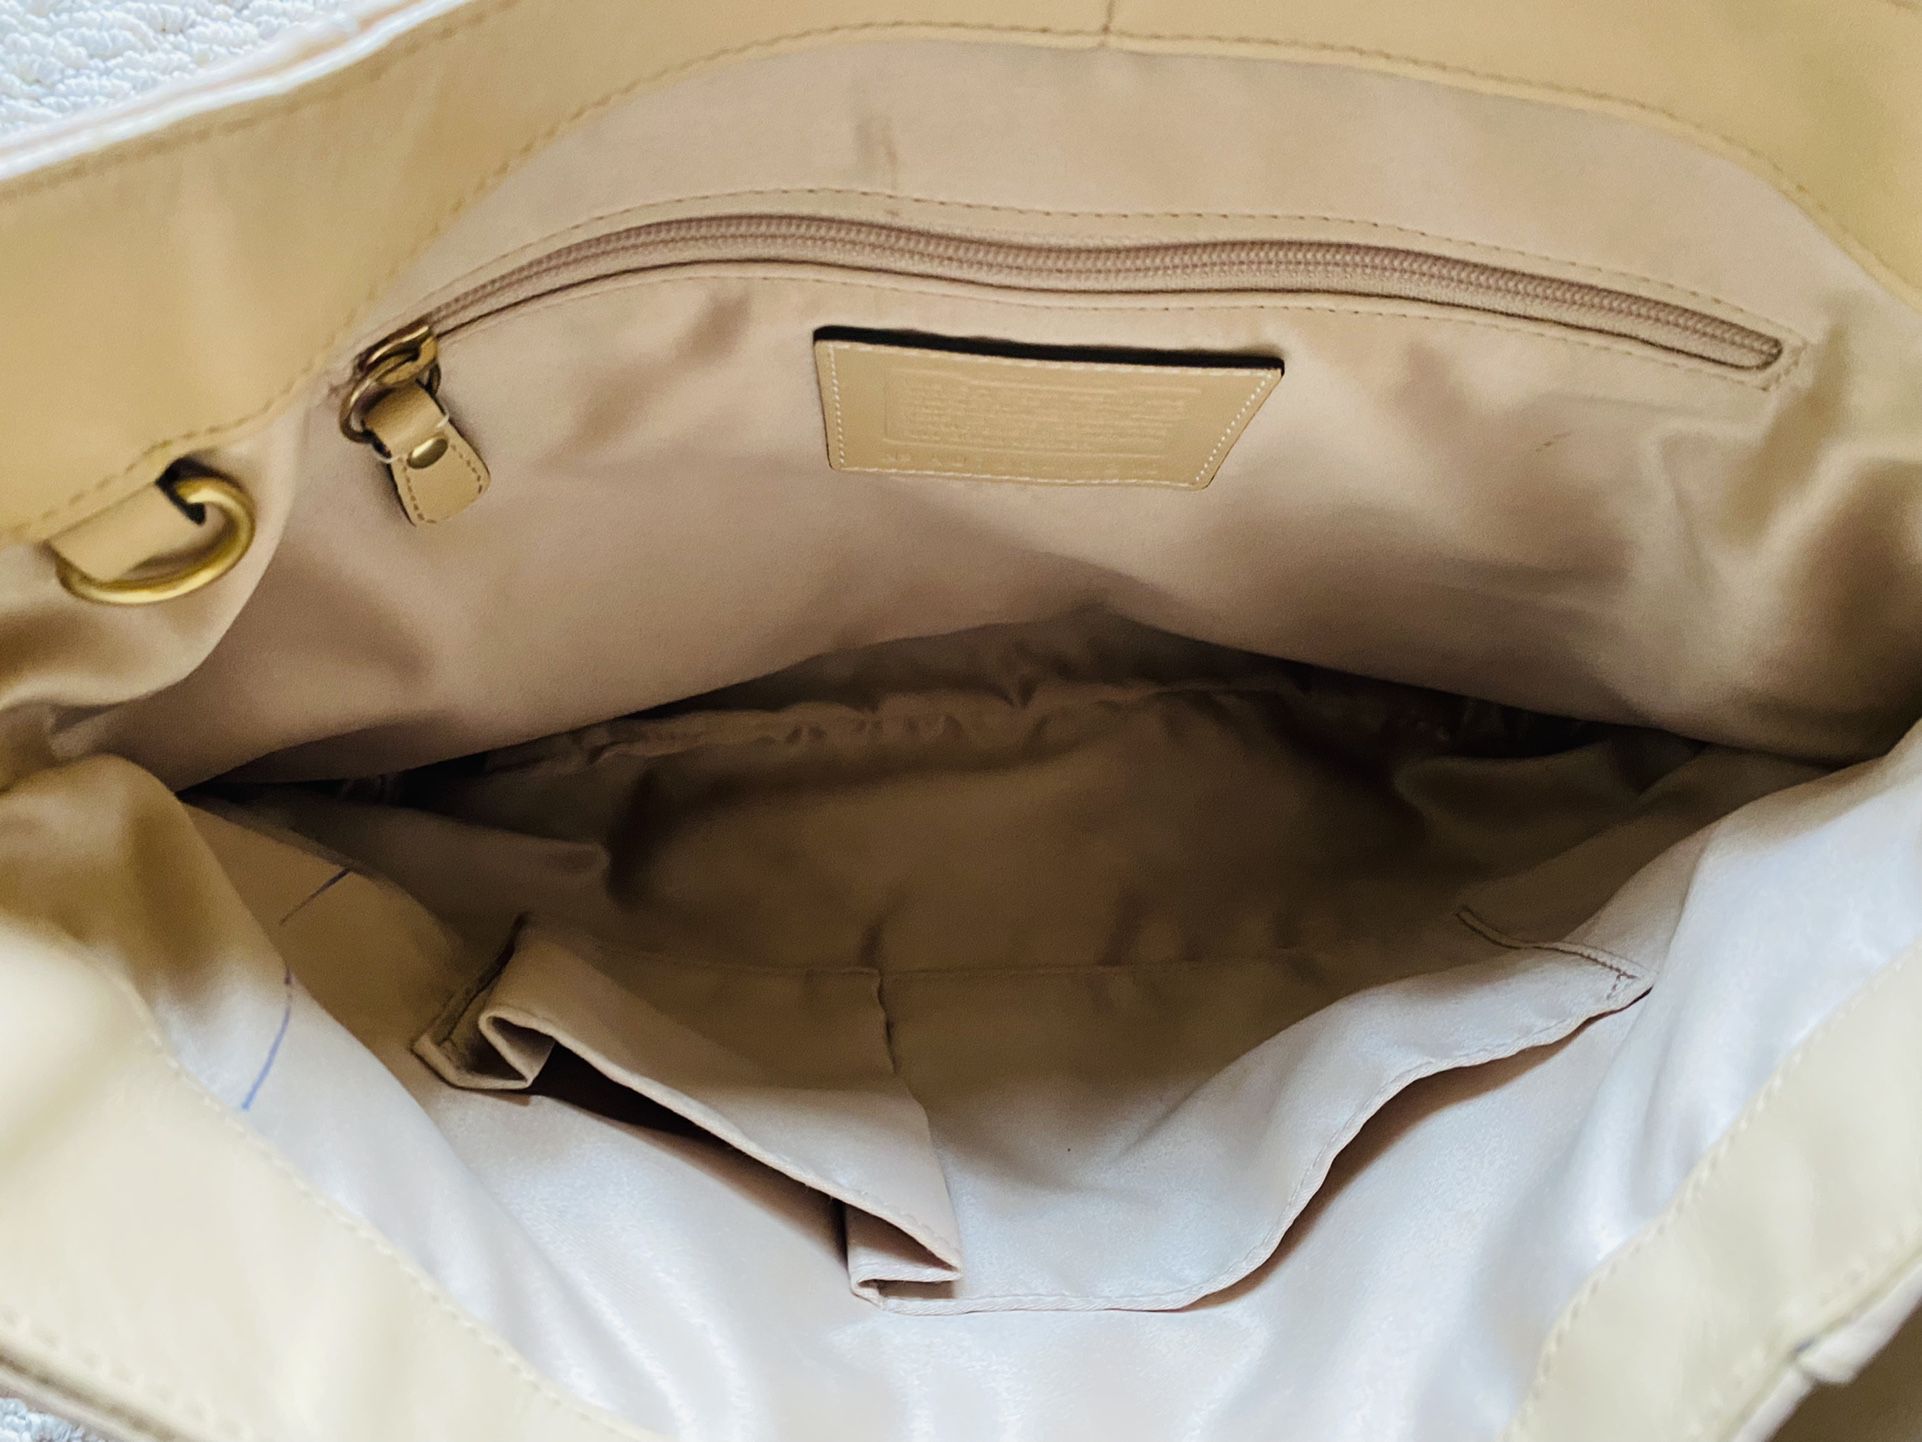 Coach Hamptons Tan Pebble Leather Hobo Shoulder Bag #A0(contact info removed)0